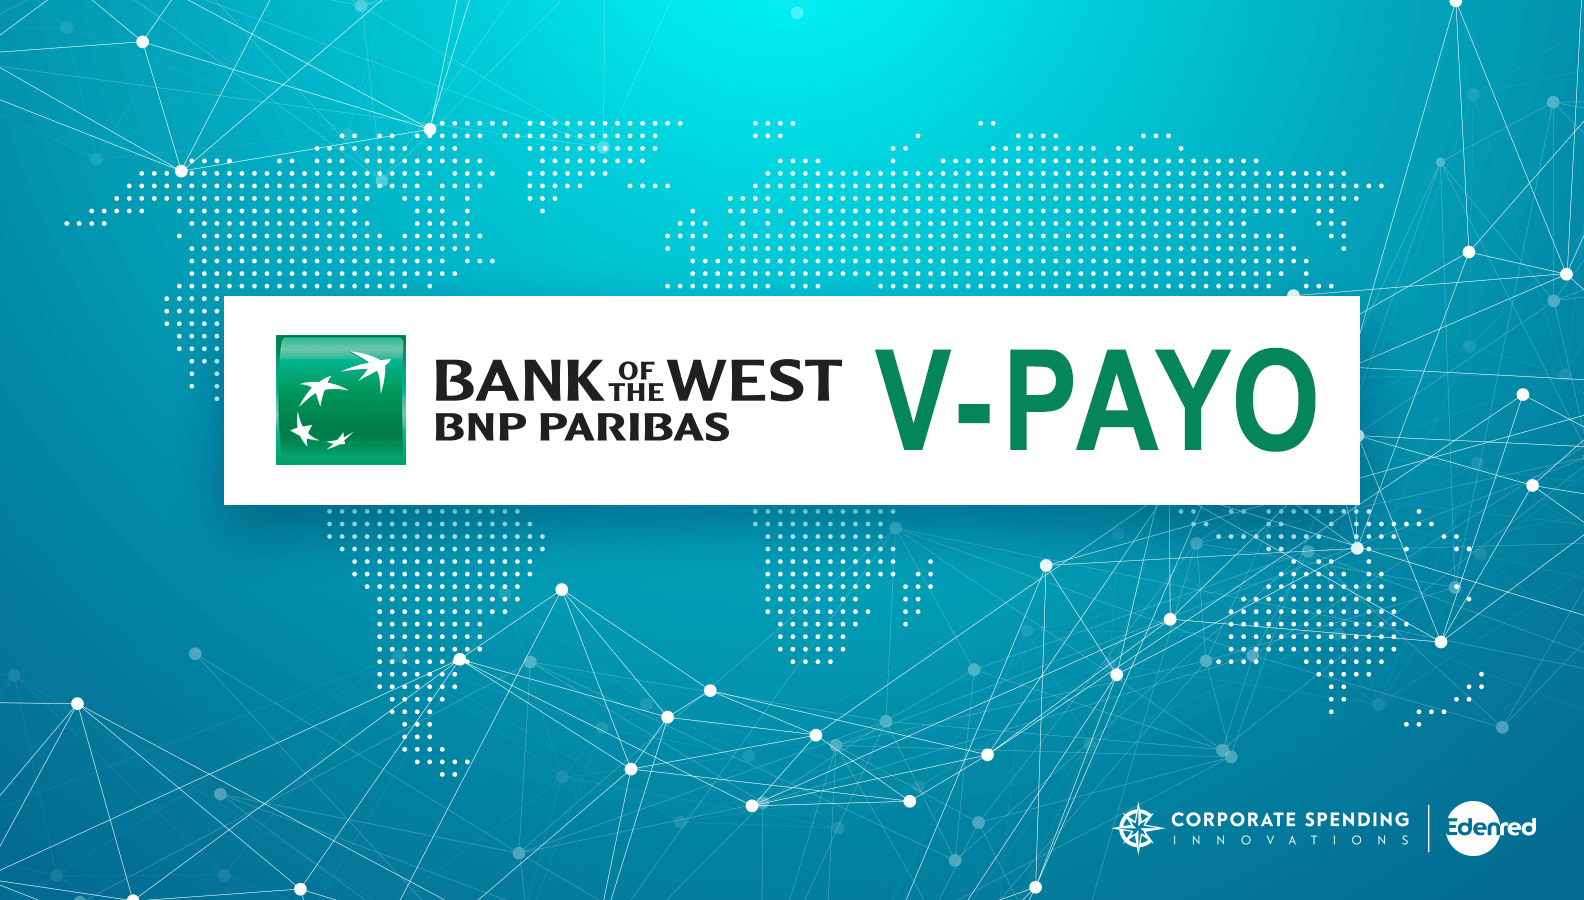 CSI Teams Up with Bank of the West to Introduce V-PAYO